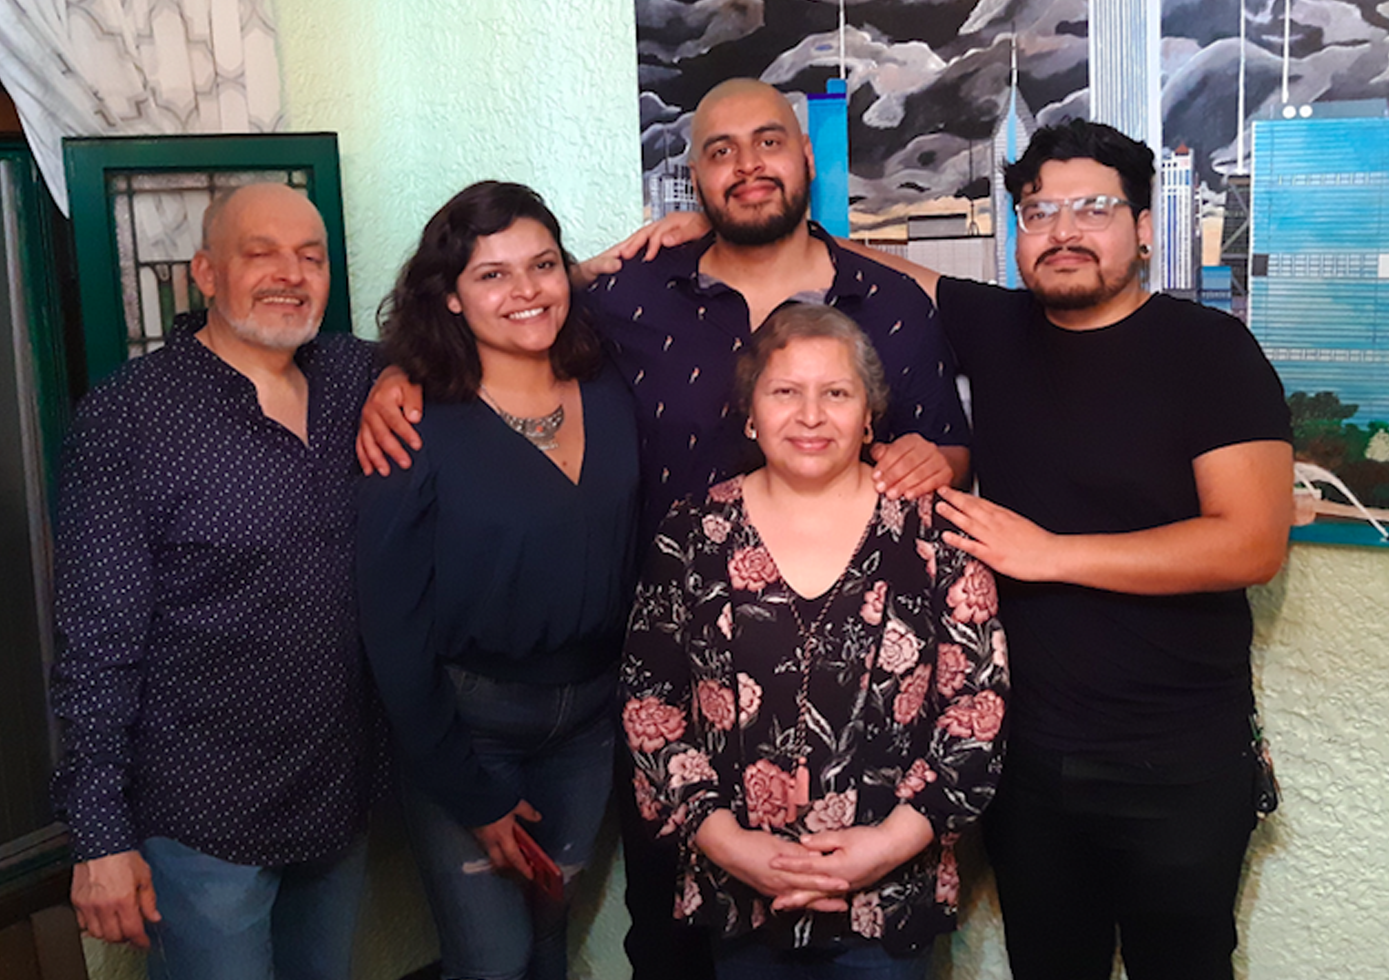 Jesus Alberto “Beto” Lopez-Gutierrez (center rear) with (from left) his father Miguel Lopez, sister Mariela Lopez, mother Lourdes Gonzalez and brother Miguel Lopez.